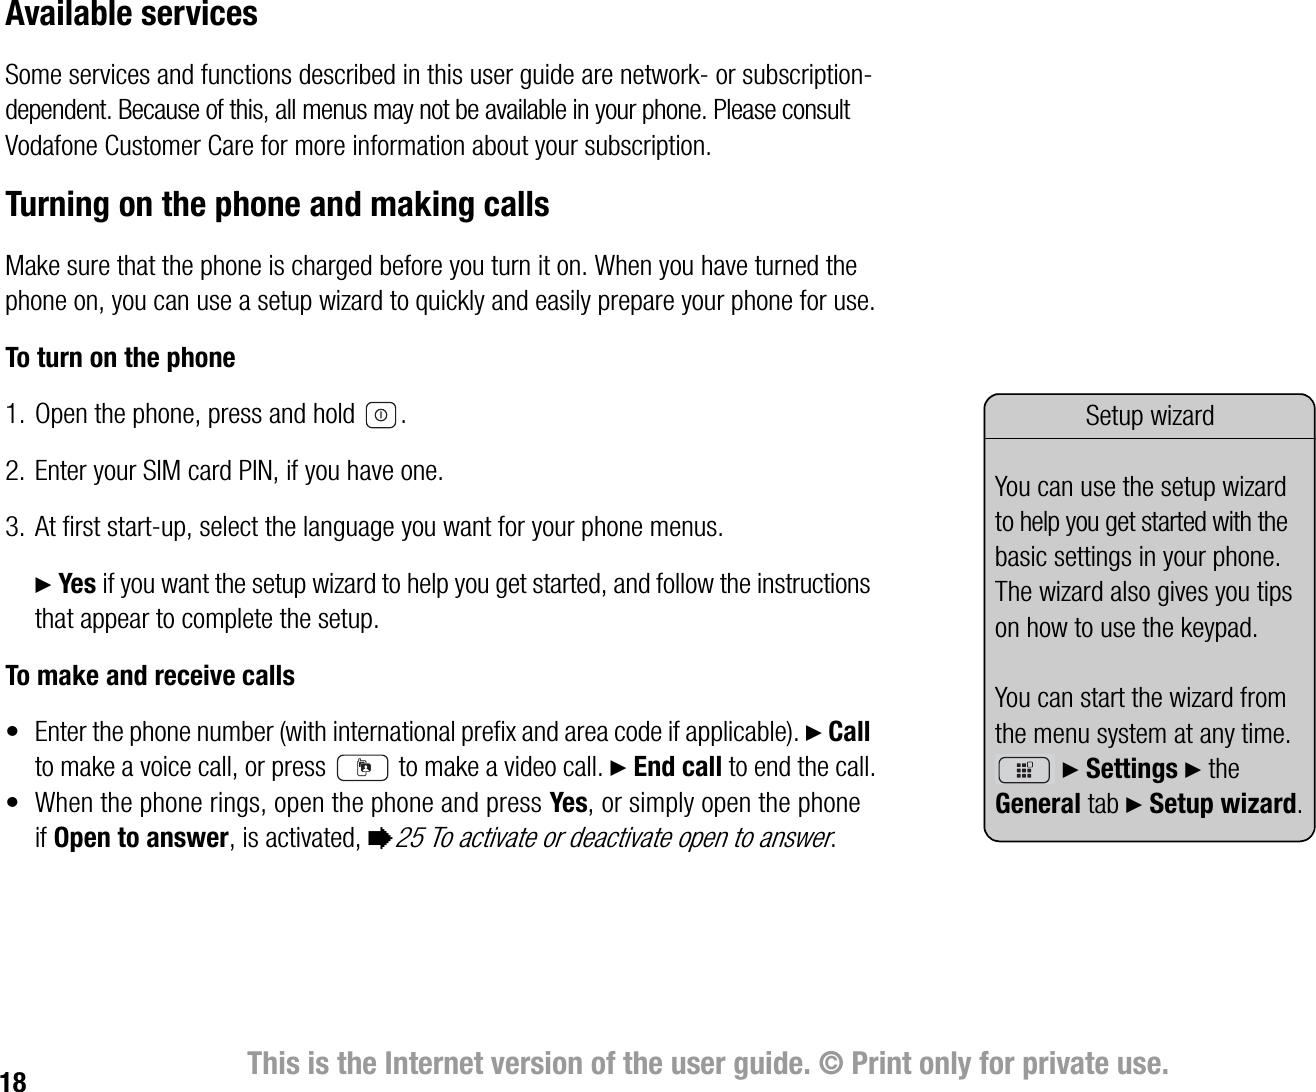 18 This is the Internet version of the user guide. © Print only for private use.Available servicesSome services and functions described in this user guide are network or subscriptiondependent. Because of this, all menus may not be available in your phone. Please consult Vodafone Customer Care for more information about your subscription.Turning on the phone and making callsMake sure that the phone is charged before you turn it on. When you have turned the phone on, you can use a setup wizard to quickly and easily prepare your phone for use.To turn on the phone1. Open the phone, press and hold  .2. Enter your SIM card PIN, if you have one.3. At first startup, select the language you want for your phone menus.} Yes if you want the setup wizard to help you get started, and follow the instructions that appear to complete the setup.To make and receive calls• Enter the phone number (with international prefix and area code if applicable). } Call to make a voice call, or press   to make a video call. } End call to end the call.• When the phone rings, open the phone and press Yes, or simply open the phone if Open to answer, is activated, %25 To activate or deactivate open to answer.Setup wizardYou can use the setup wizard to help you get started with the basic settings in your phone. The wizard also gives you tips on how to use the keypad. You can start the wizard from the menu system at any time. } Settings } the General tab } Setup wizard.